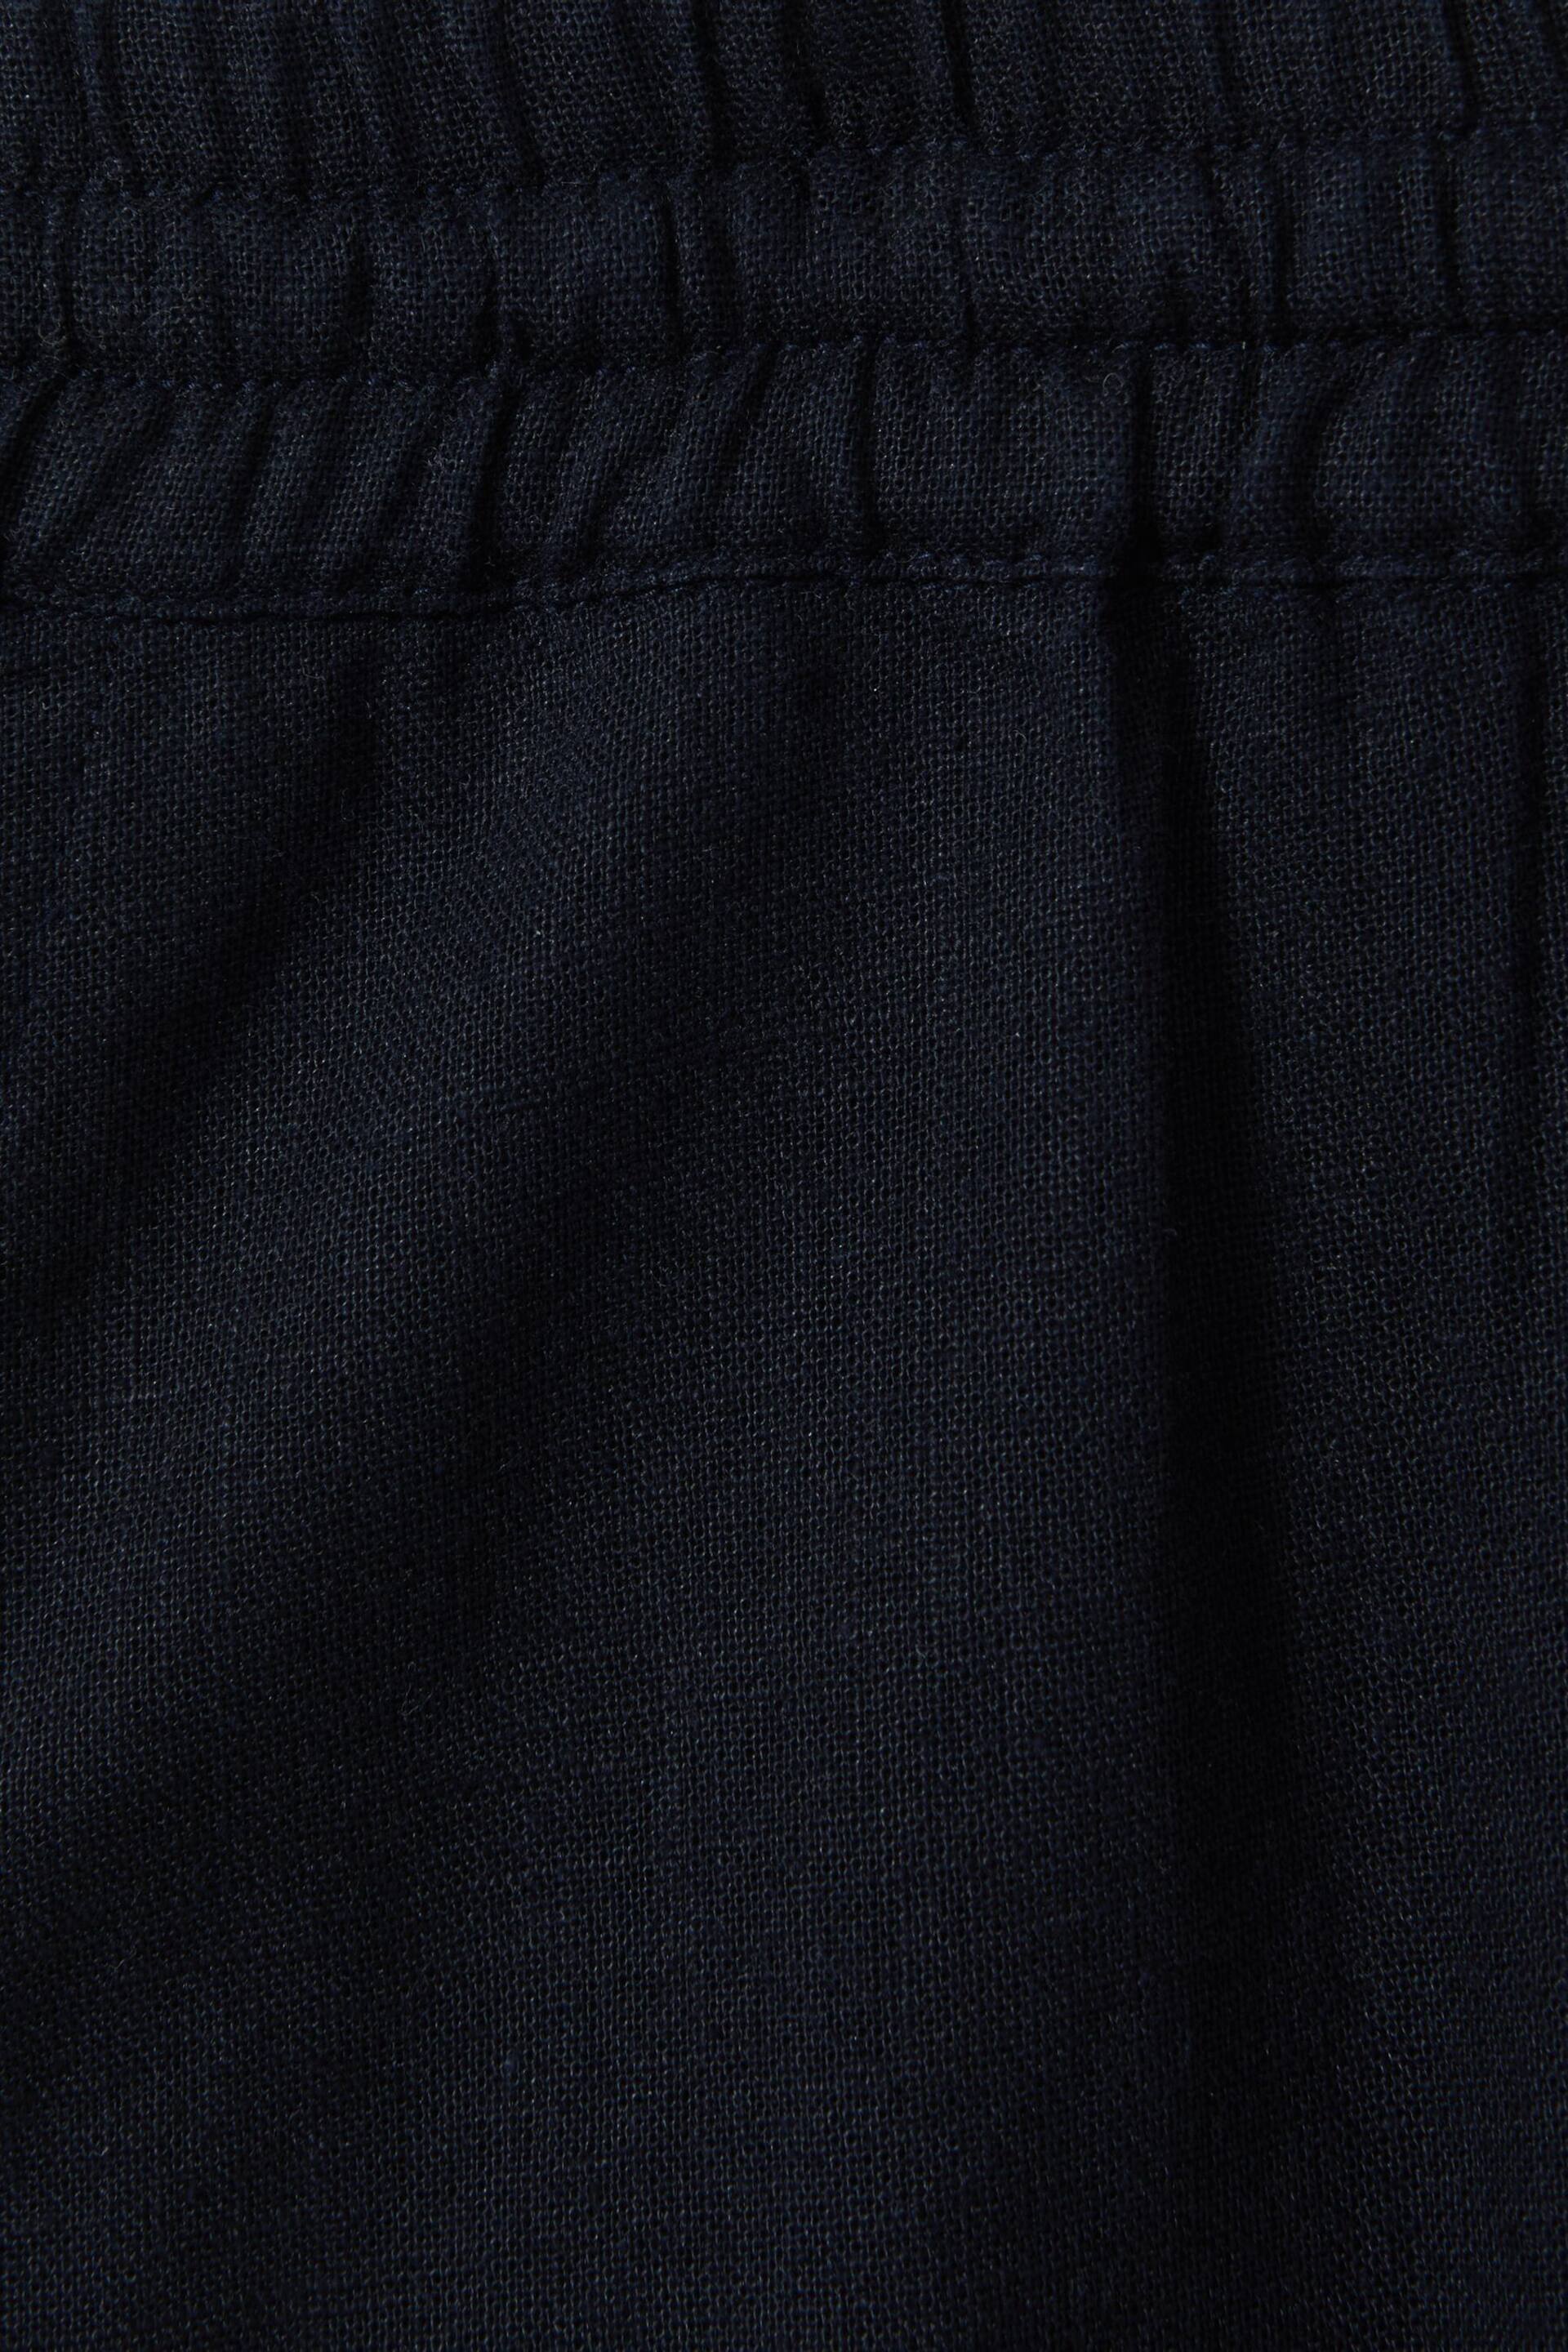 Reiss Navy Wilfred Senior Linen Drawstring Tapered Trousers - Image 4 of 4